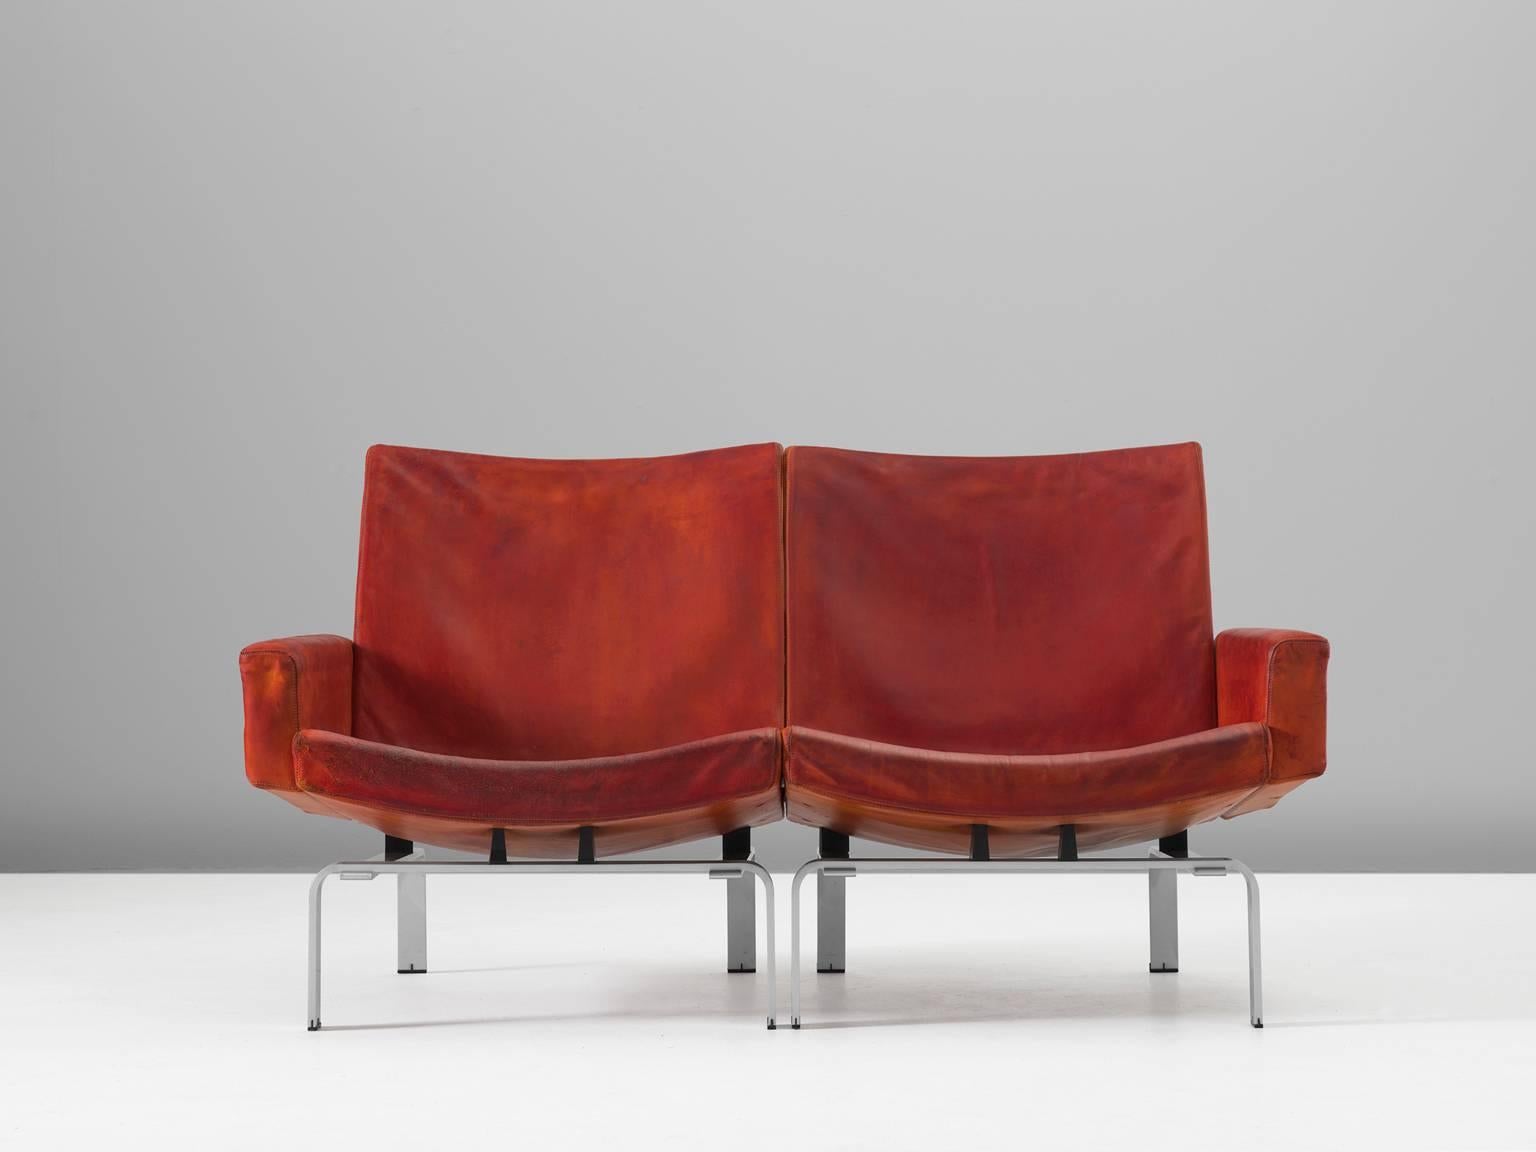 Very exclusive cognac sofa designed by Jørgen Høj, who worked in the same atelier together with Poul Kjaerholm. 

Highly extraordinary design. Sofa is placed on a well formed aluminium frame which are recognizable for the designs of Høj. The